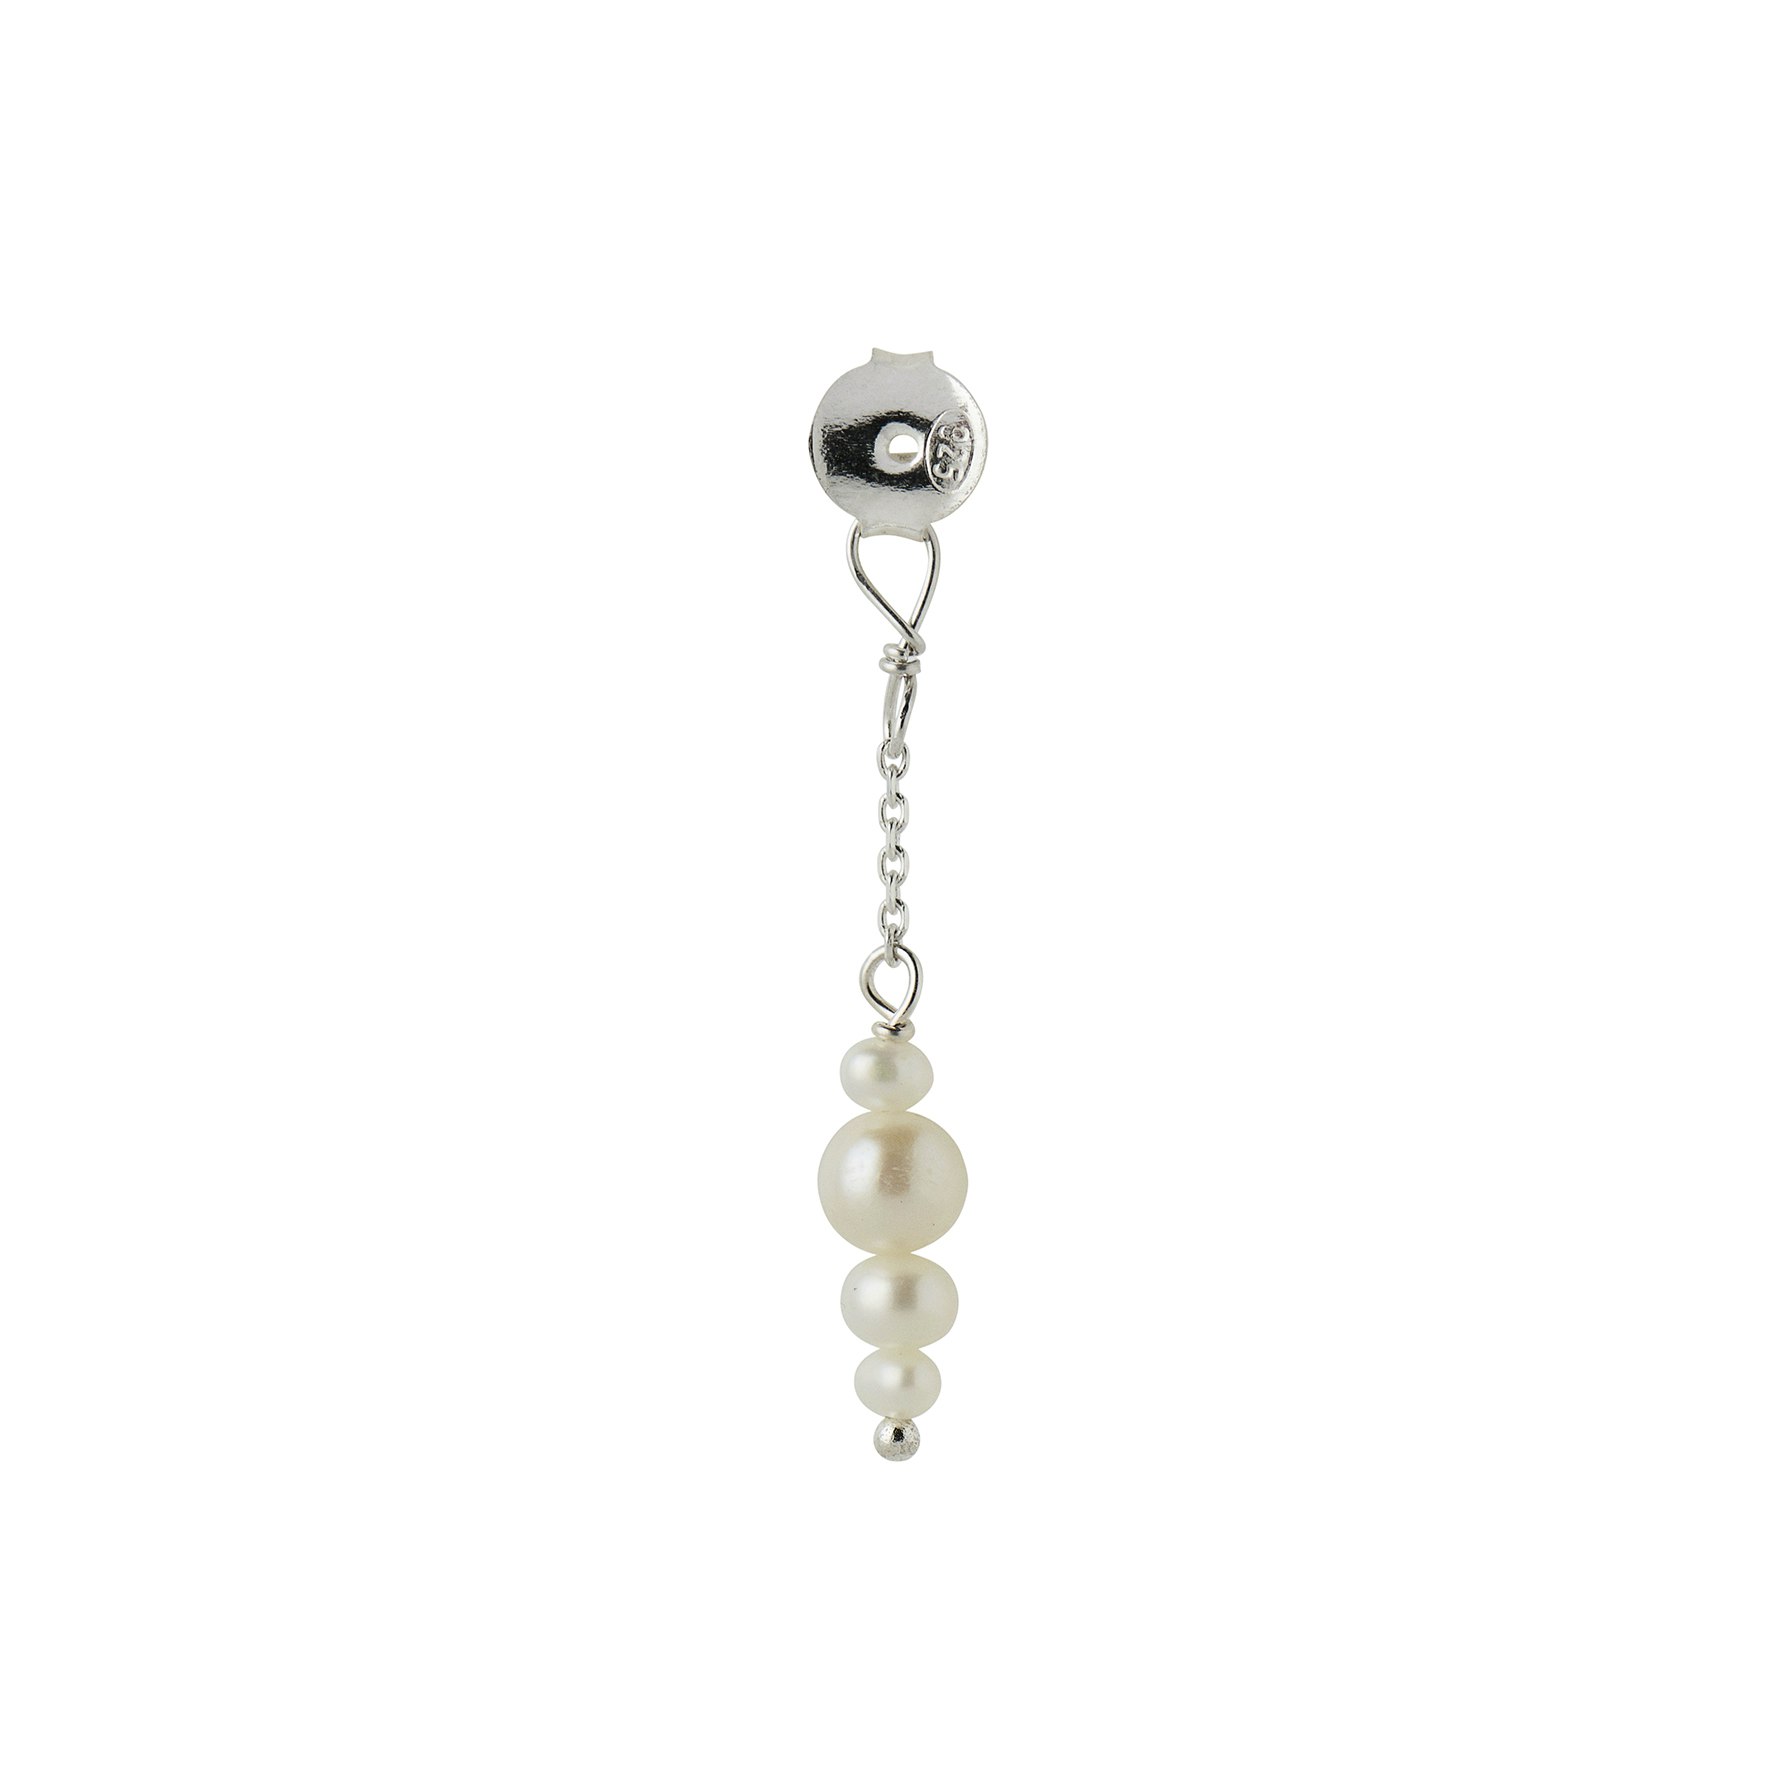 Petit Pearl Berries Behind Ear Earring fra STINE A Jewelry i Sølv Sterling 925